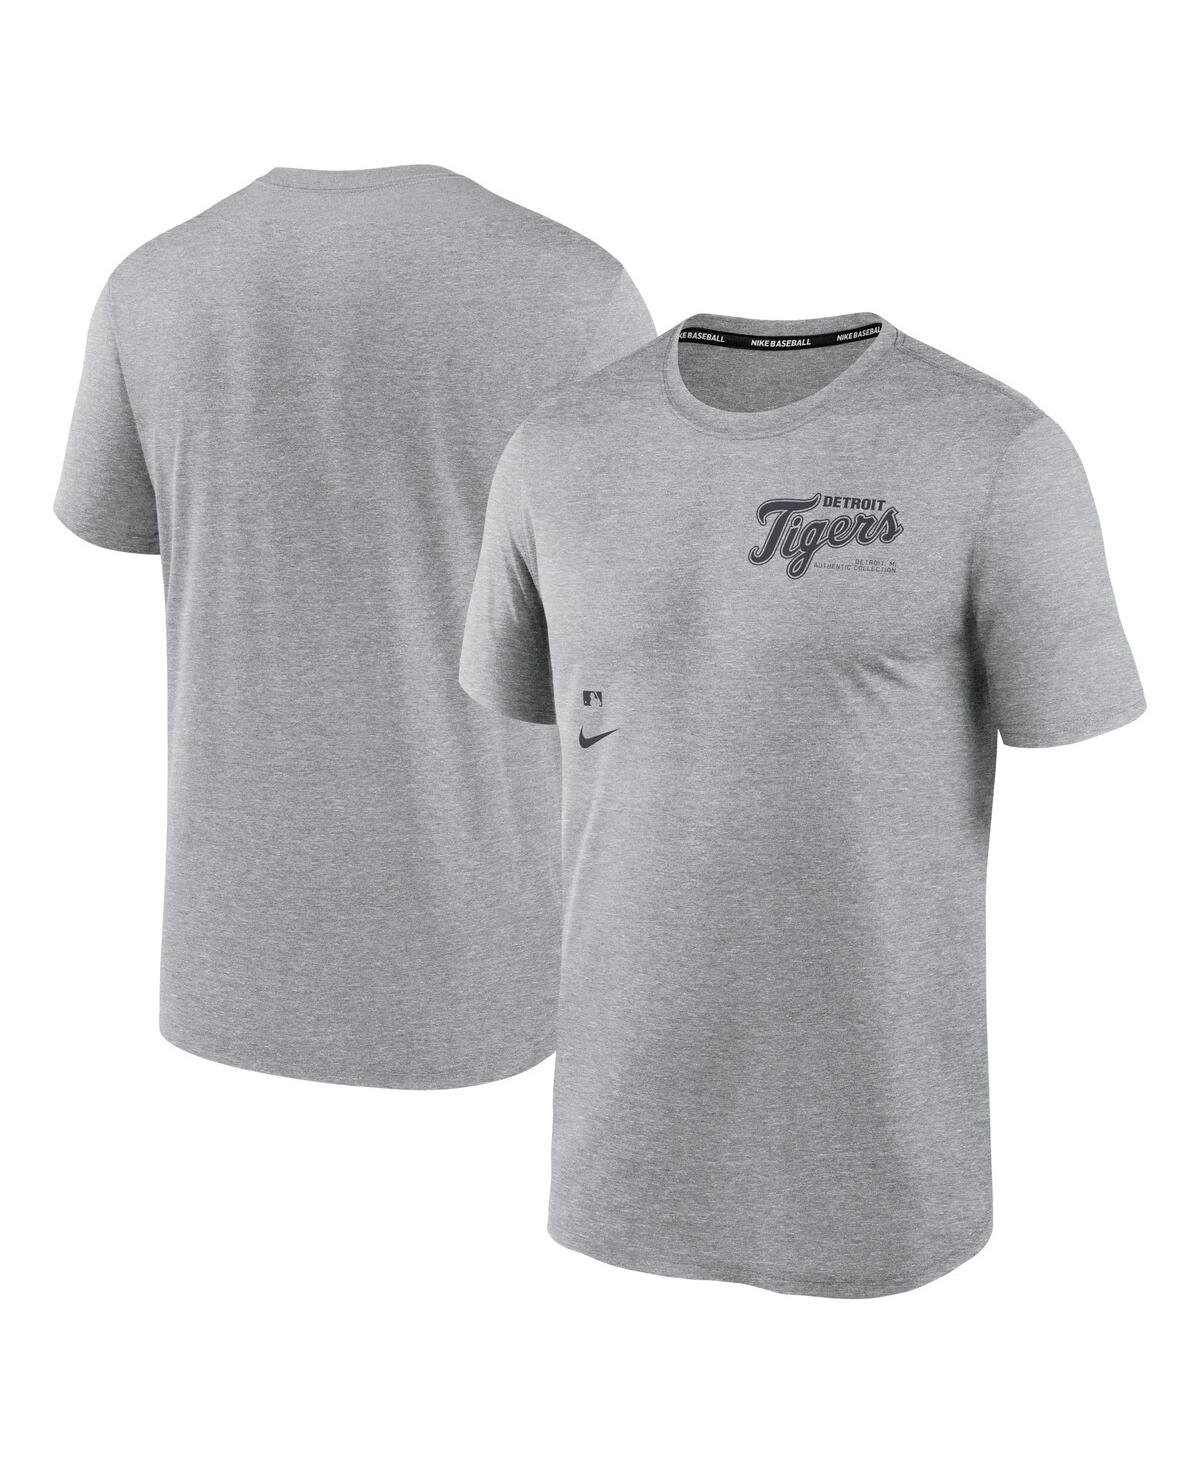 Men's Heather Charcoal Detroit Tigers Authentic Collection Early Work Tri-Blend Performance T-Shirt - Heather Charcoal